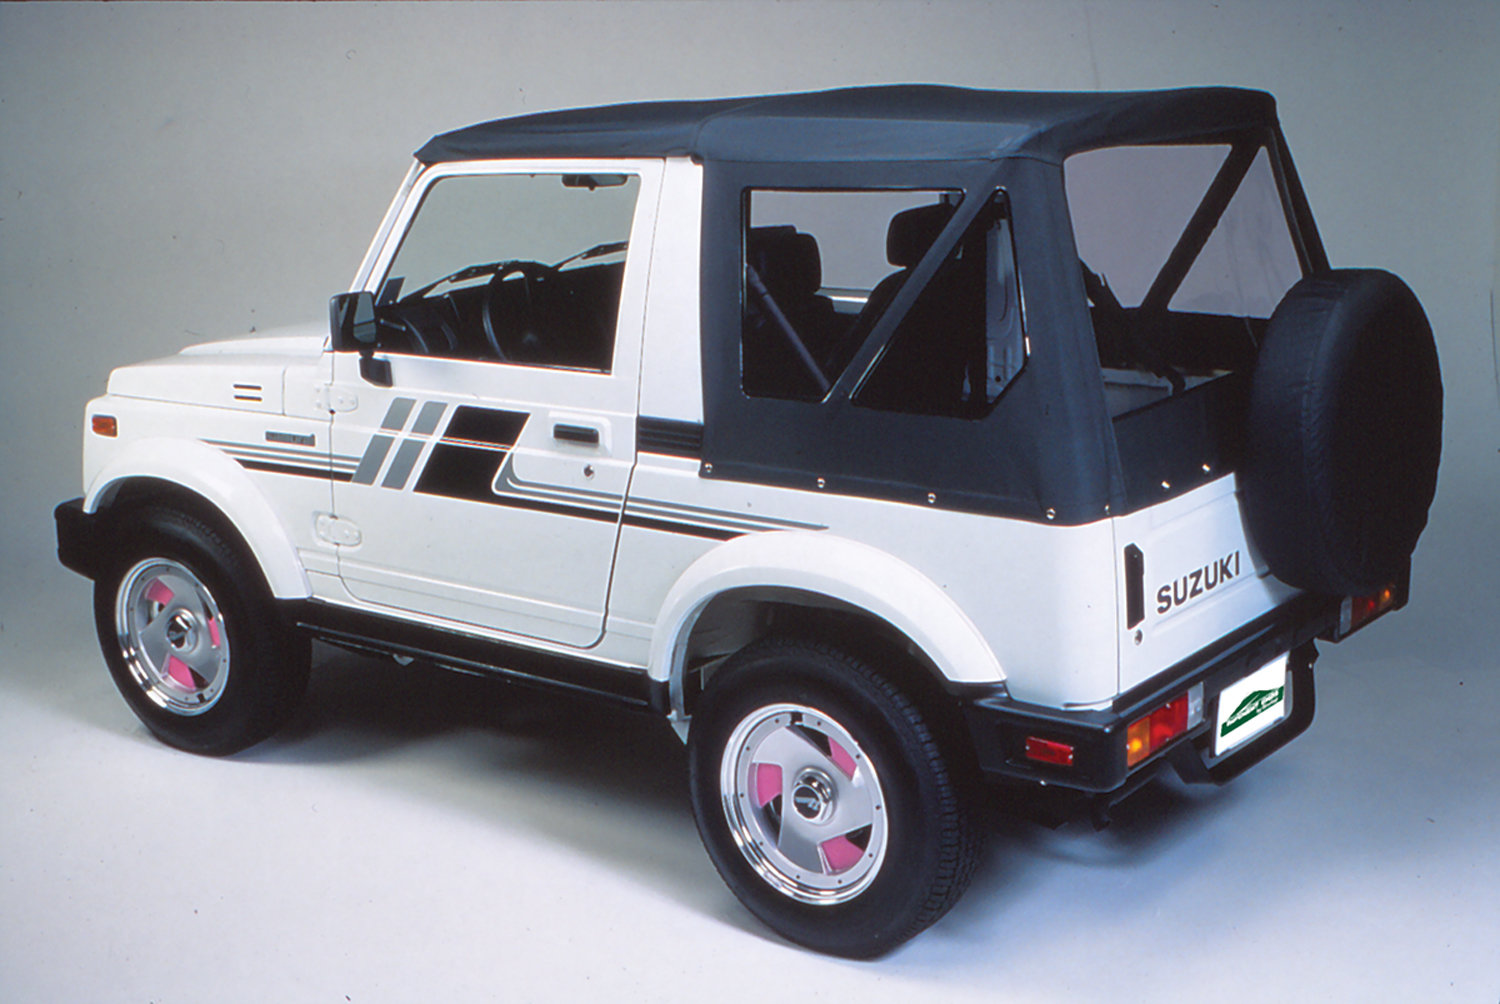 Pavement Ends by Bestop 51133-52 White Denim Replay Replacement Soft Top Clear Windows; No door skins included for 1987-1995 Suzuki Samurai 